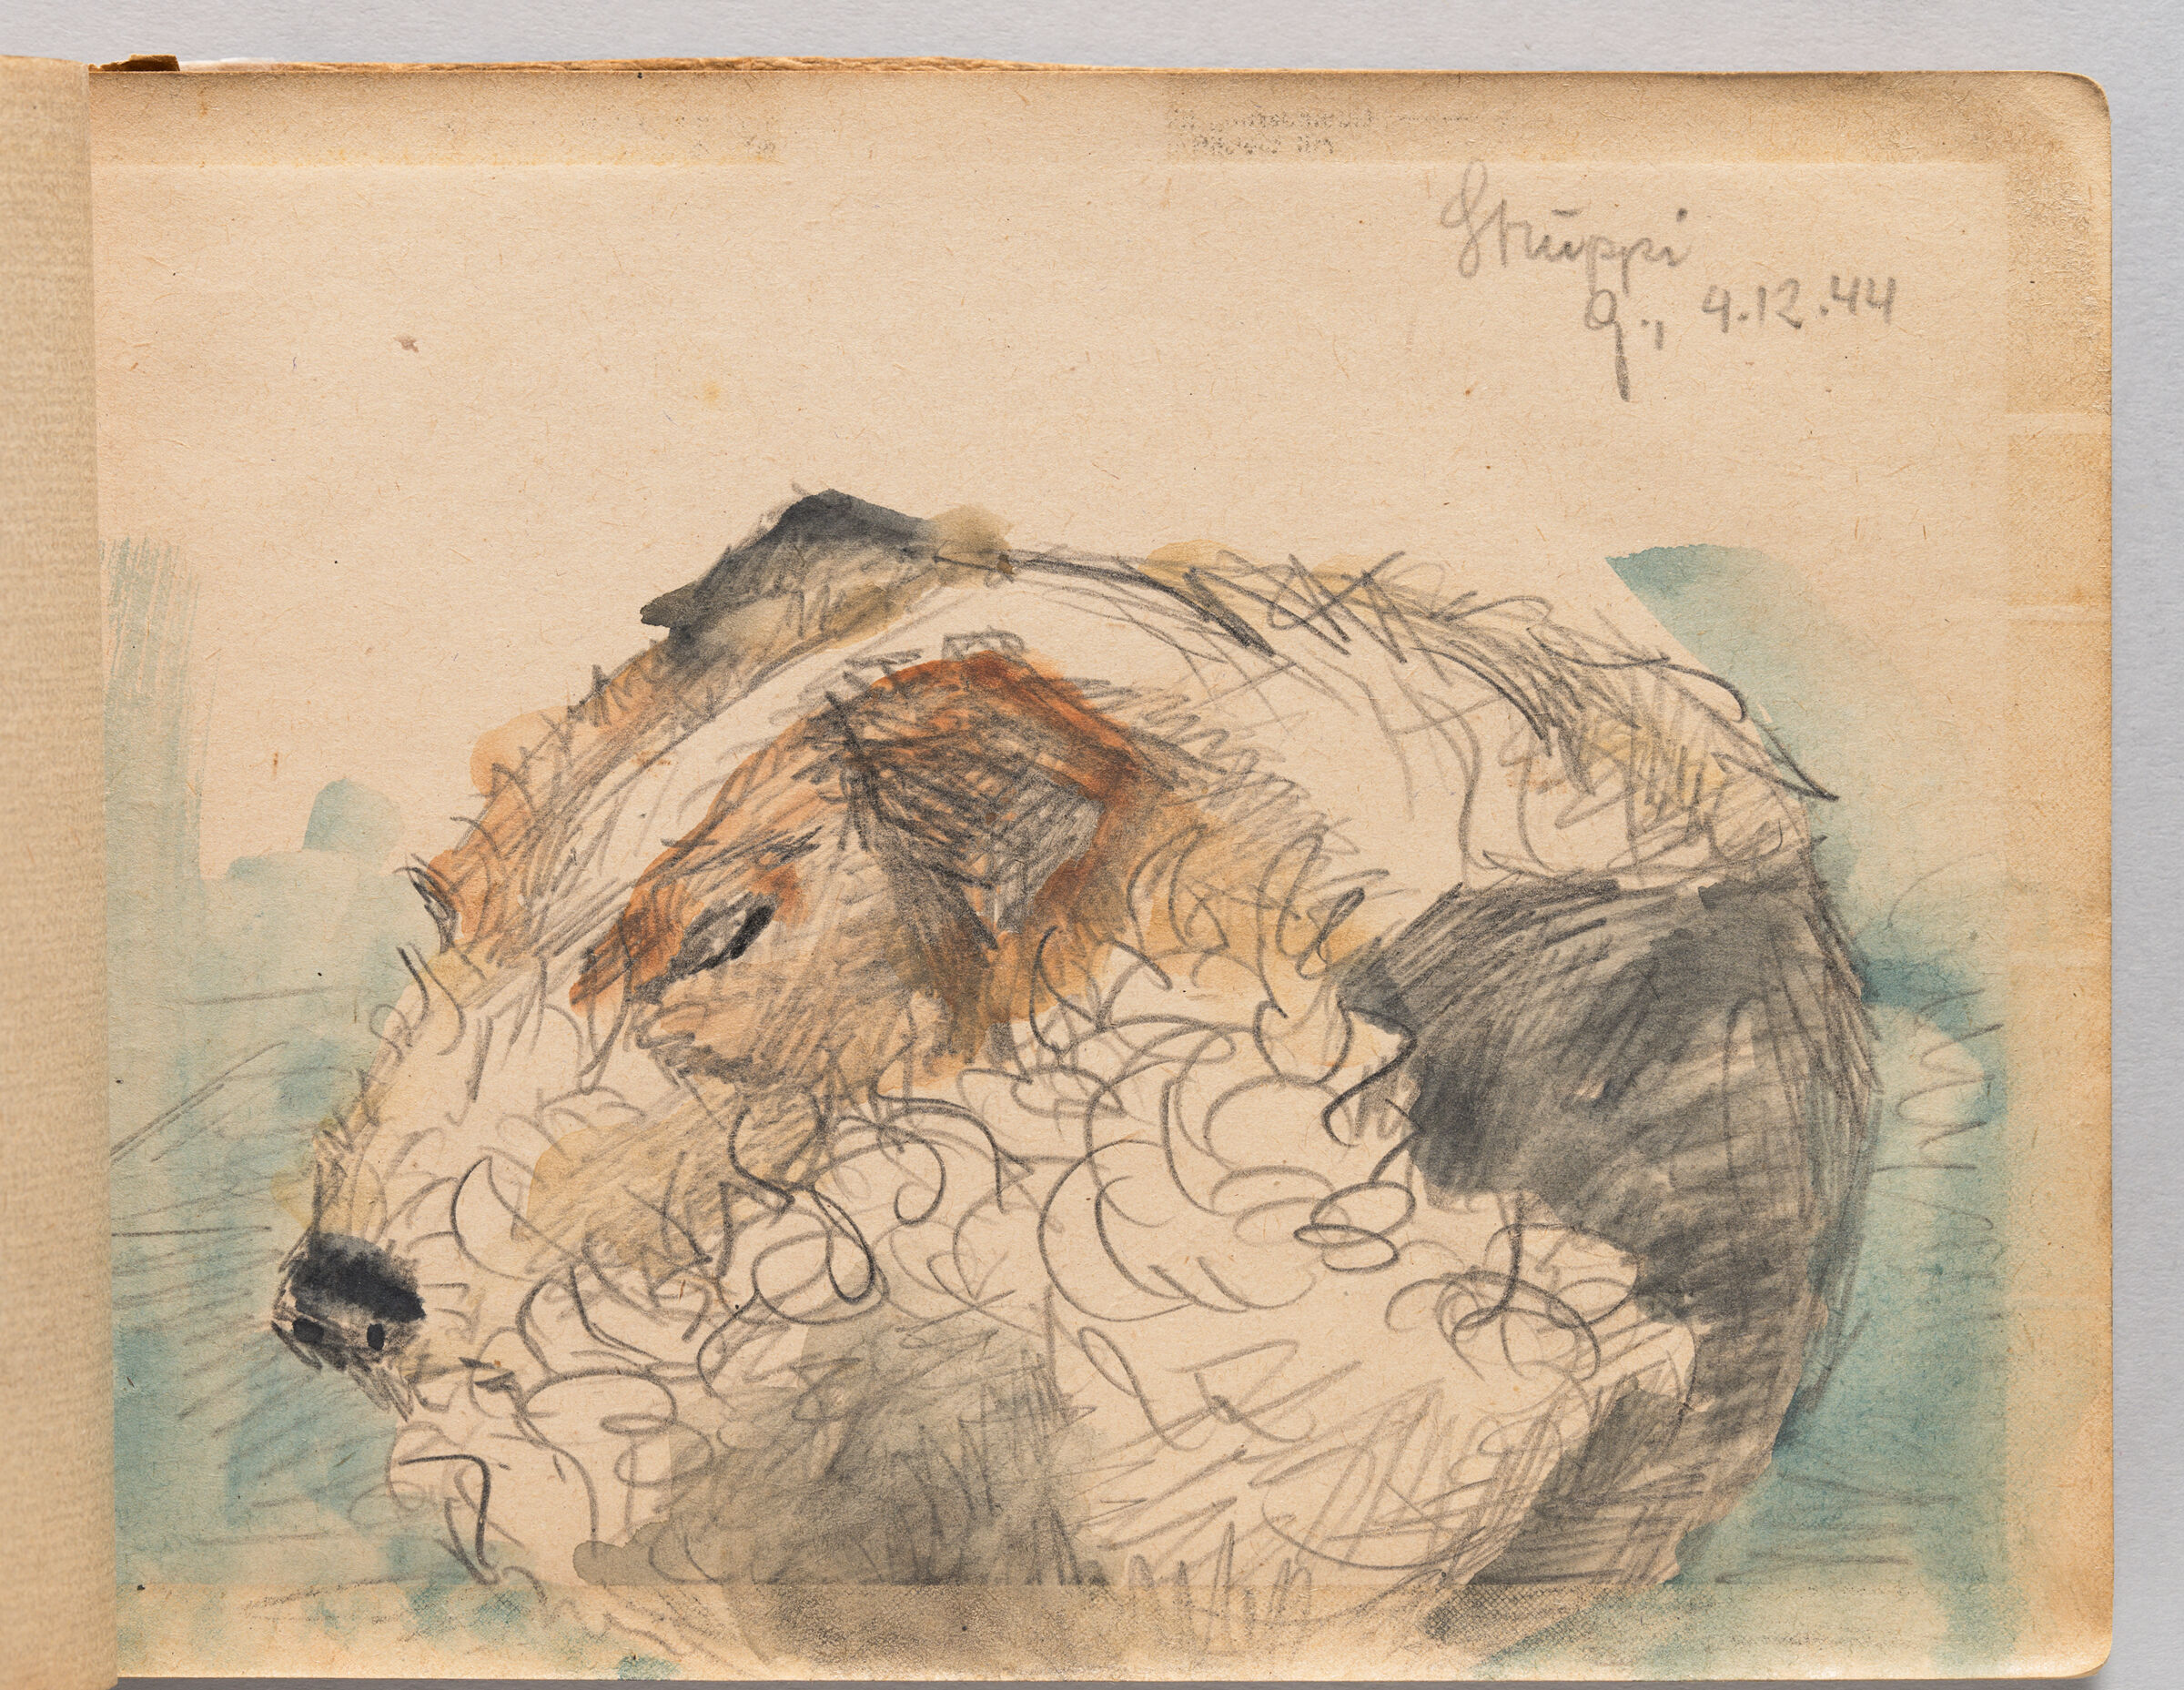 Untitled (Blank With Graphite Transfer, Left Page); Untitled (Sleeping Dog, Right Page)